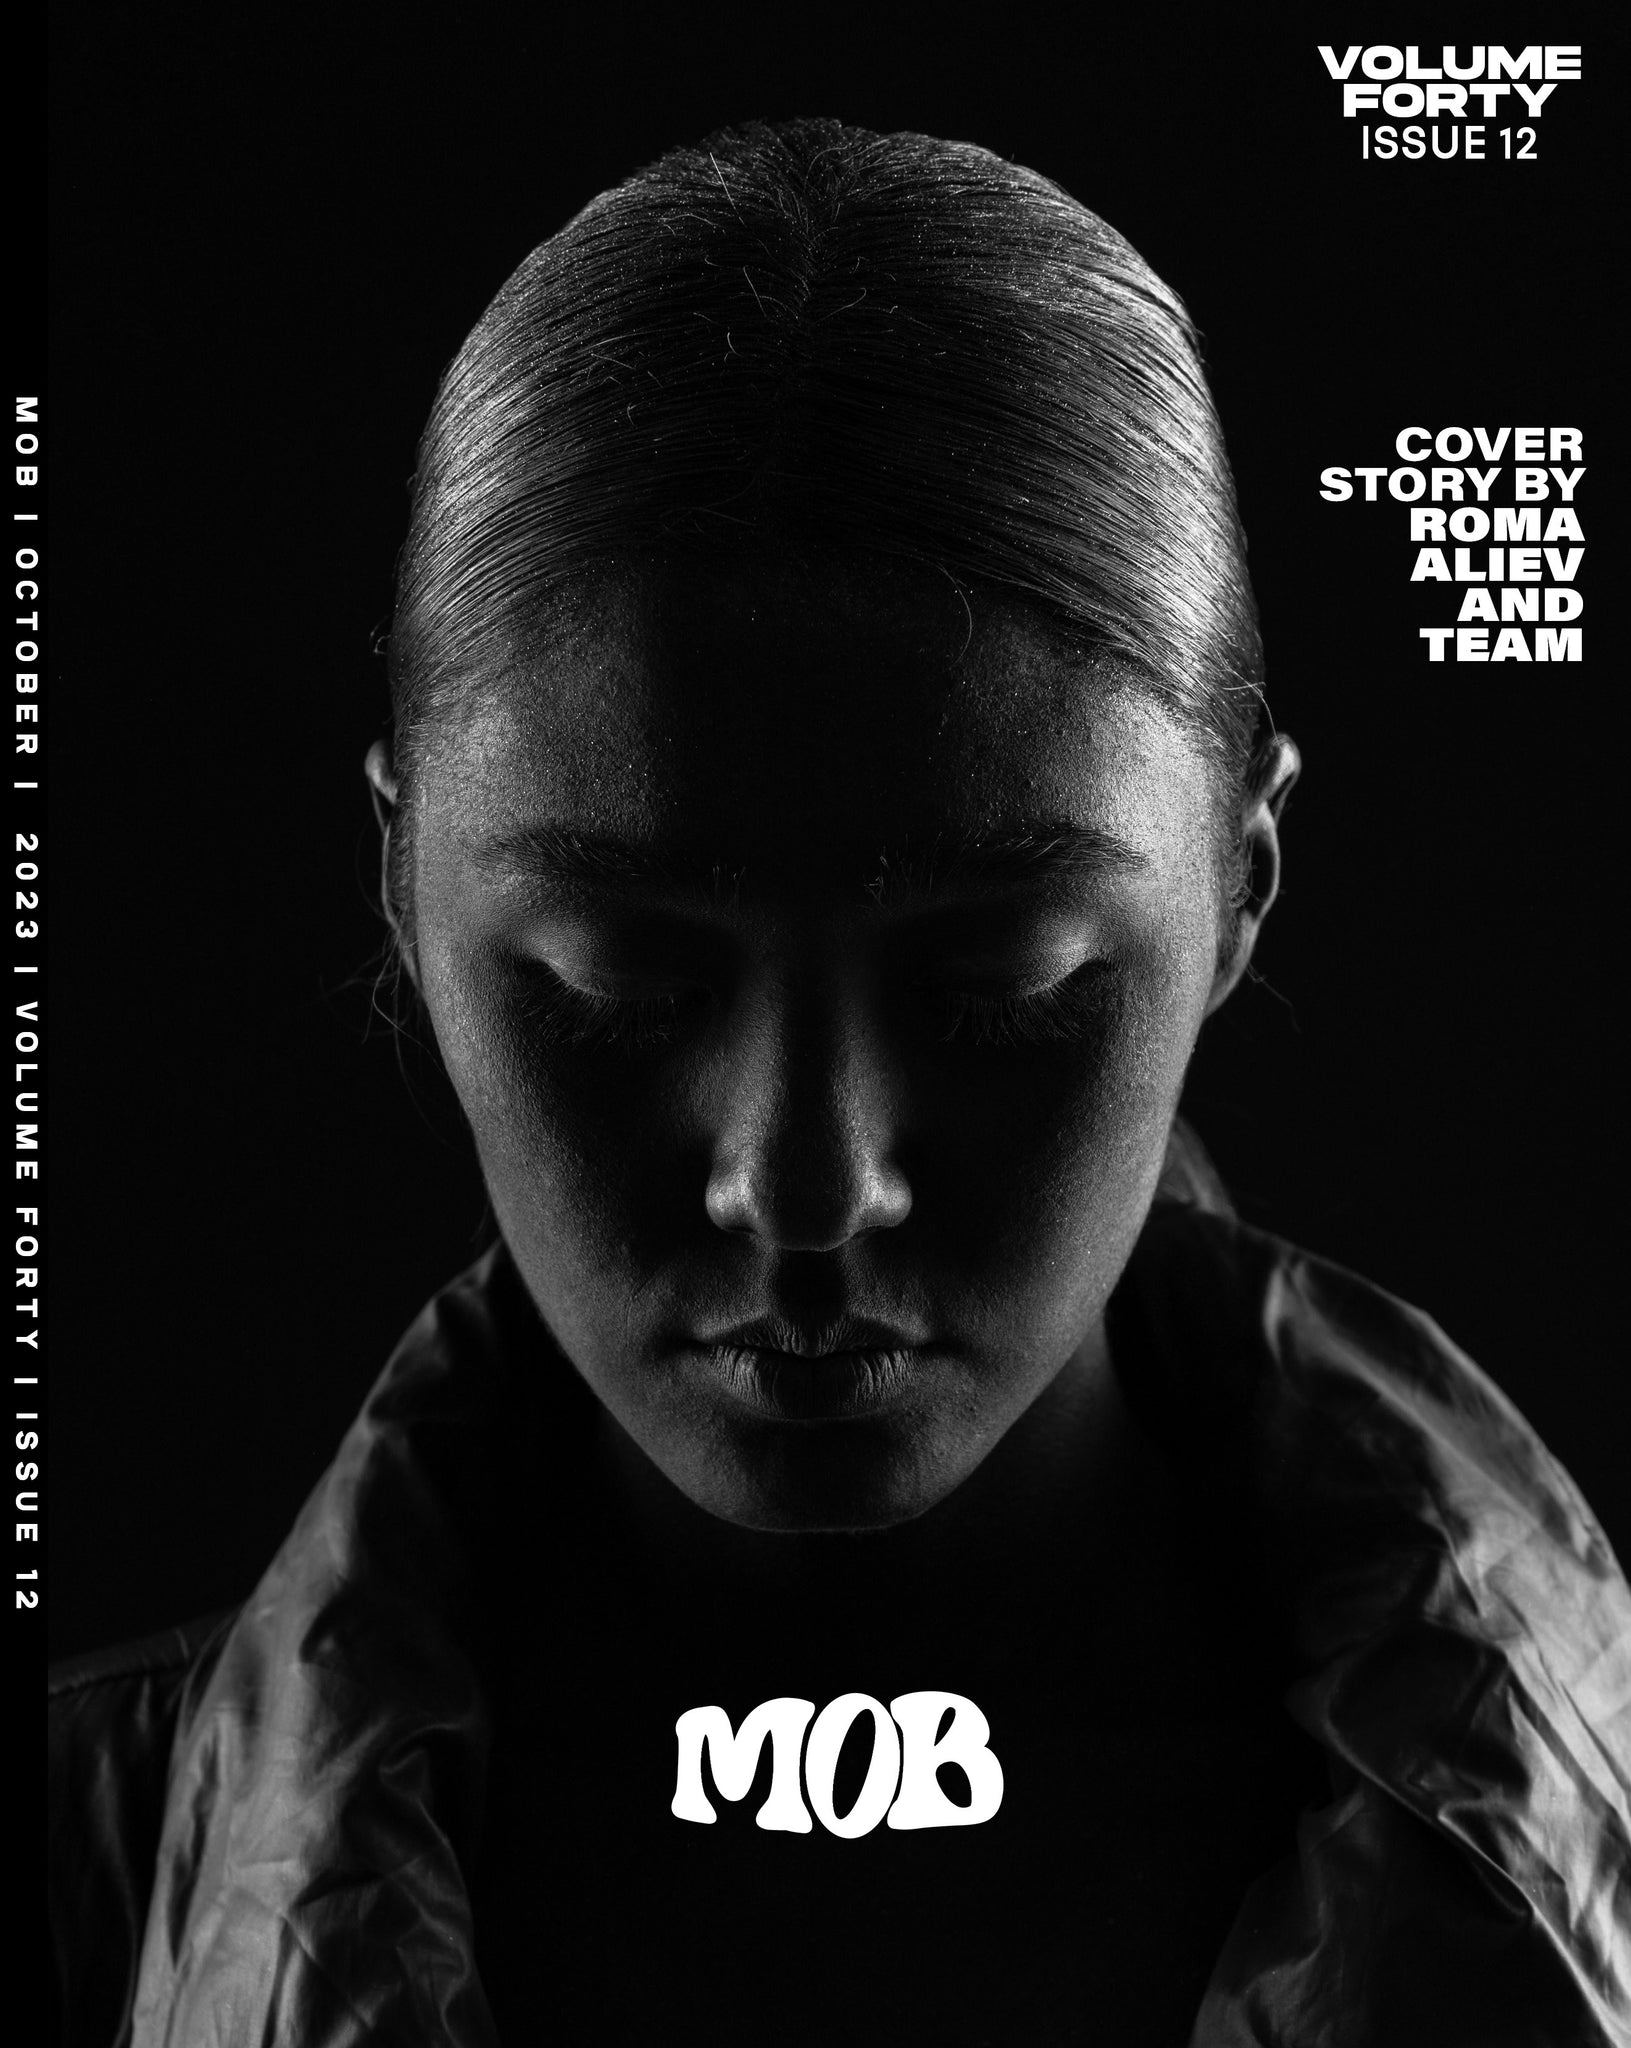 MOB JOURNAL | VOLUME FORTY | ISSUE #12